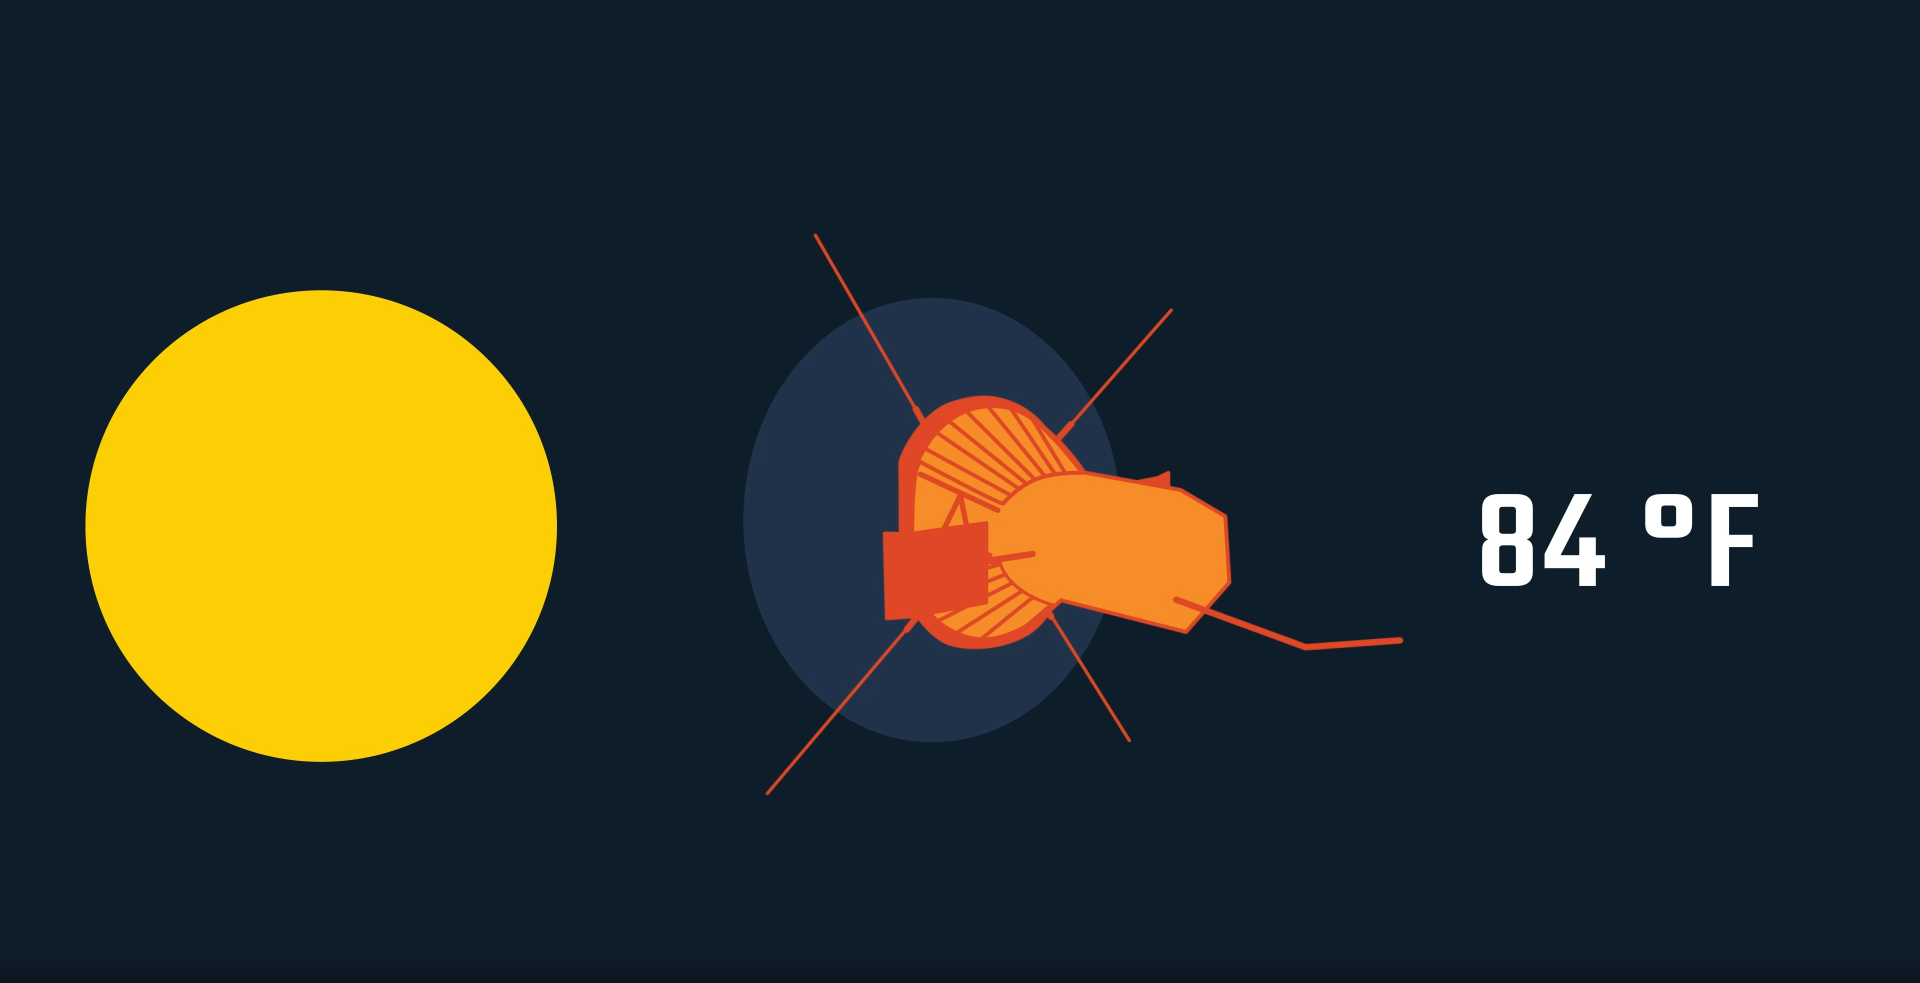 Illustration of Parker Solar Probe and the Sun, with temperature 84 degrees F written next to it